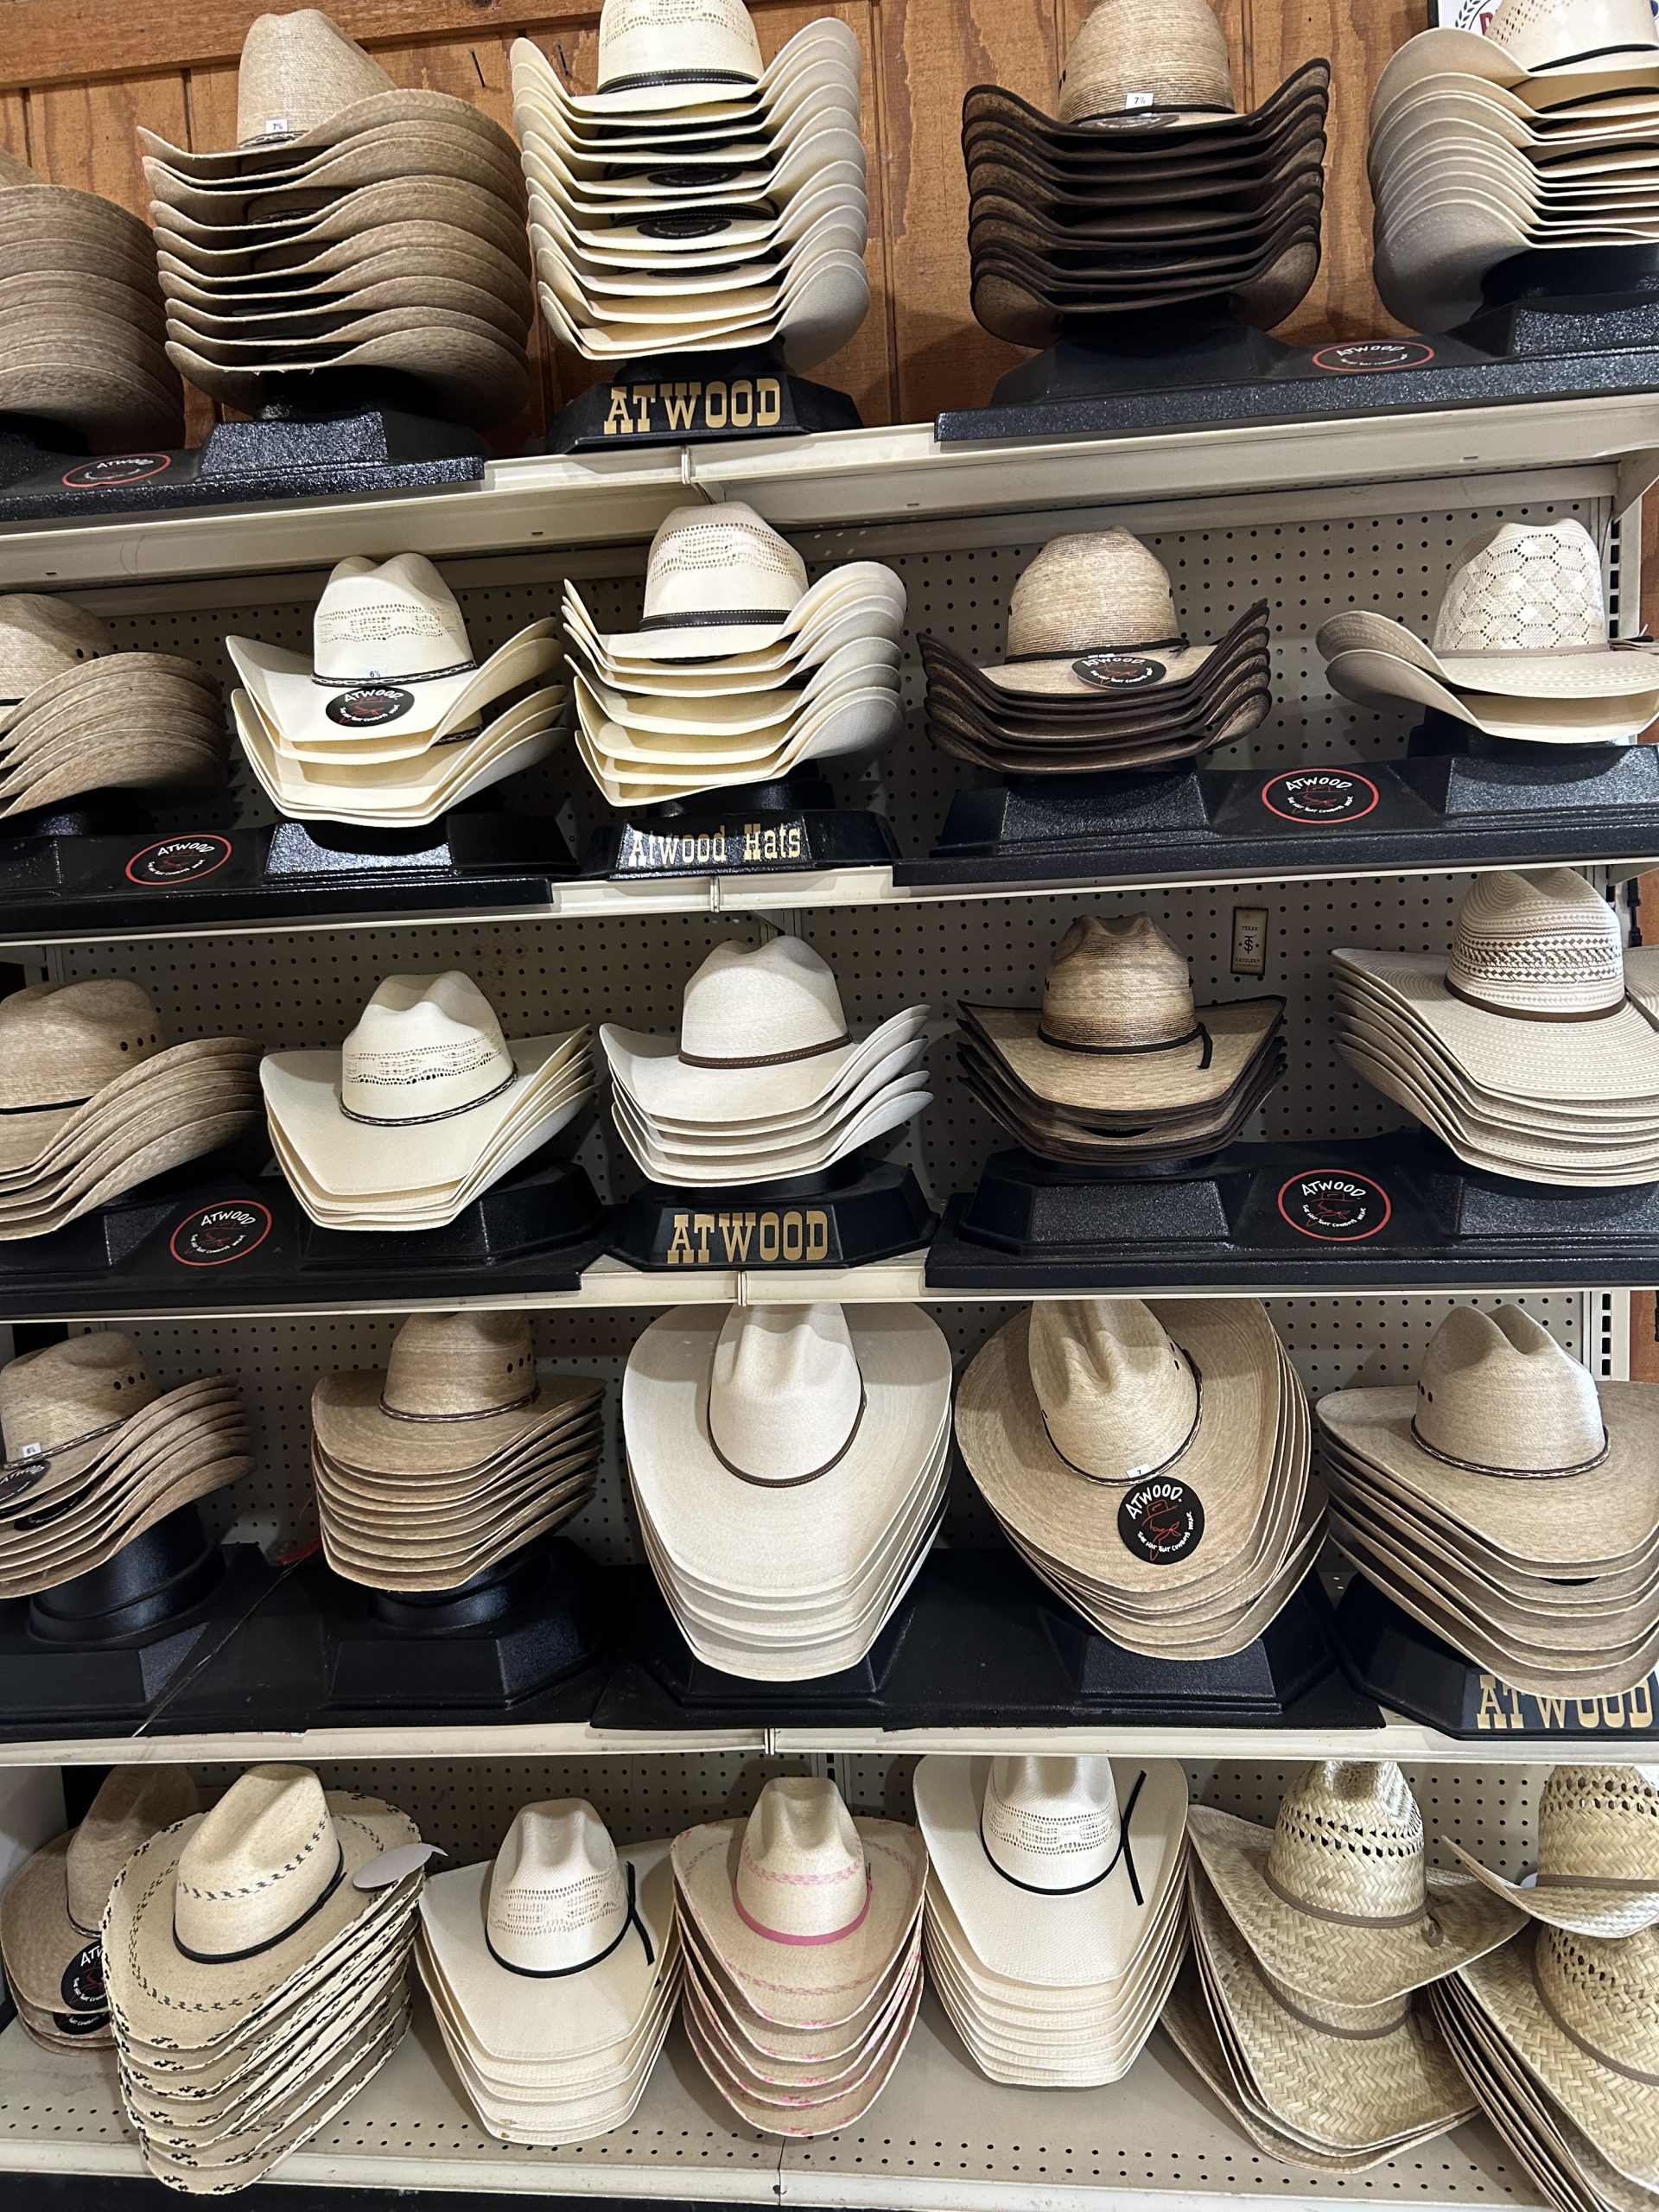 Atwood Hats at New Braunfels Feed 